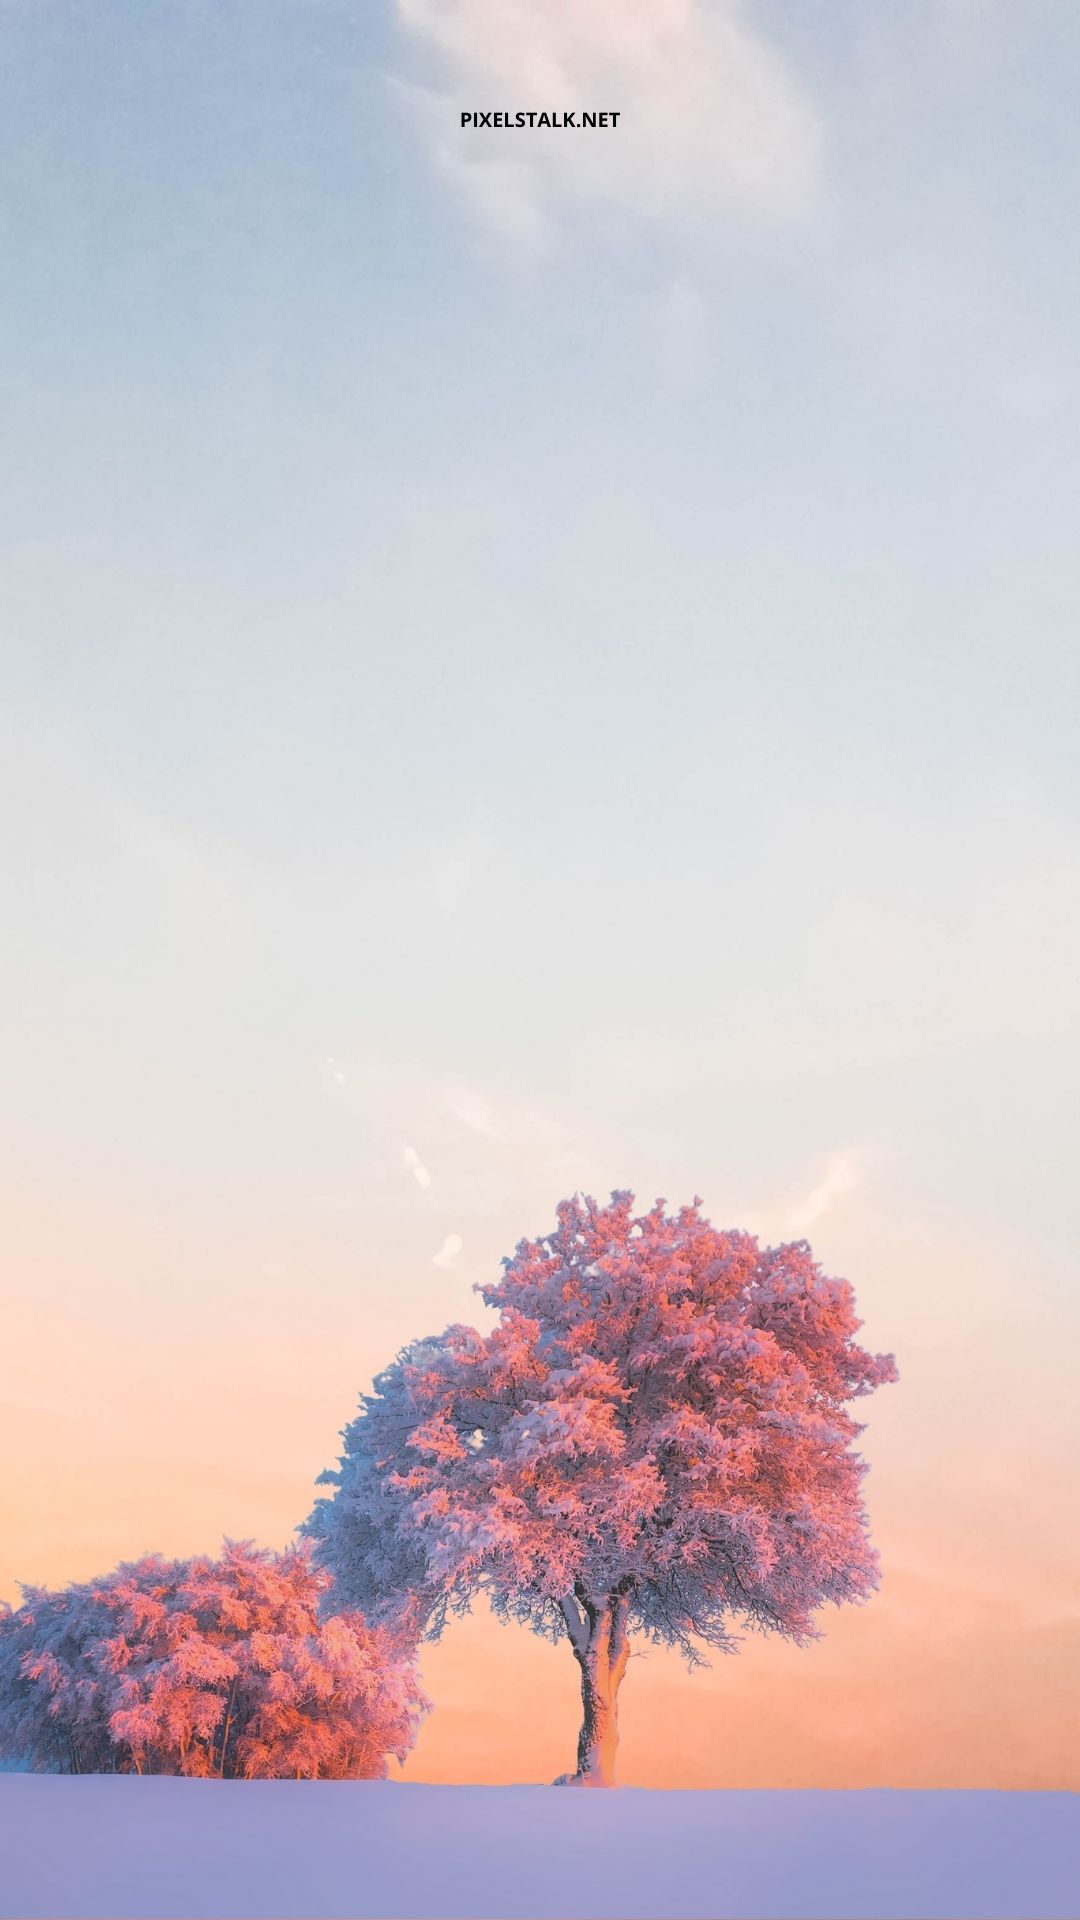 Aesthetic phone wallpaper of a tree in a snowy sunset - Winter